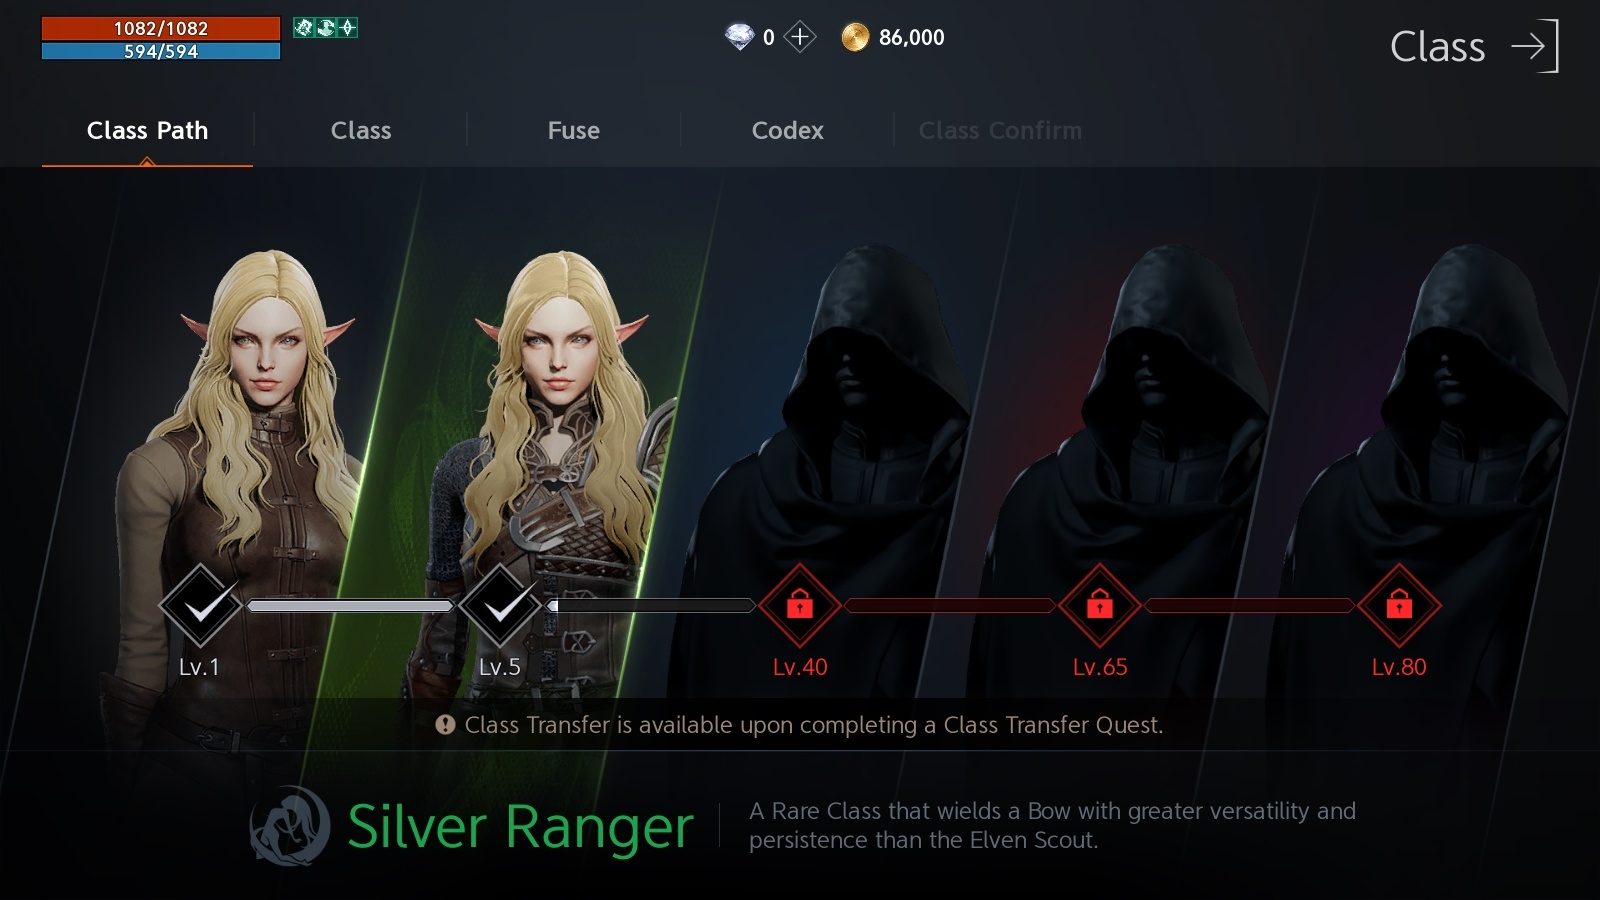 Lineage 2M Class Guide - How to Unlock New Classes, Change Classes, and More